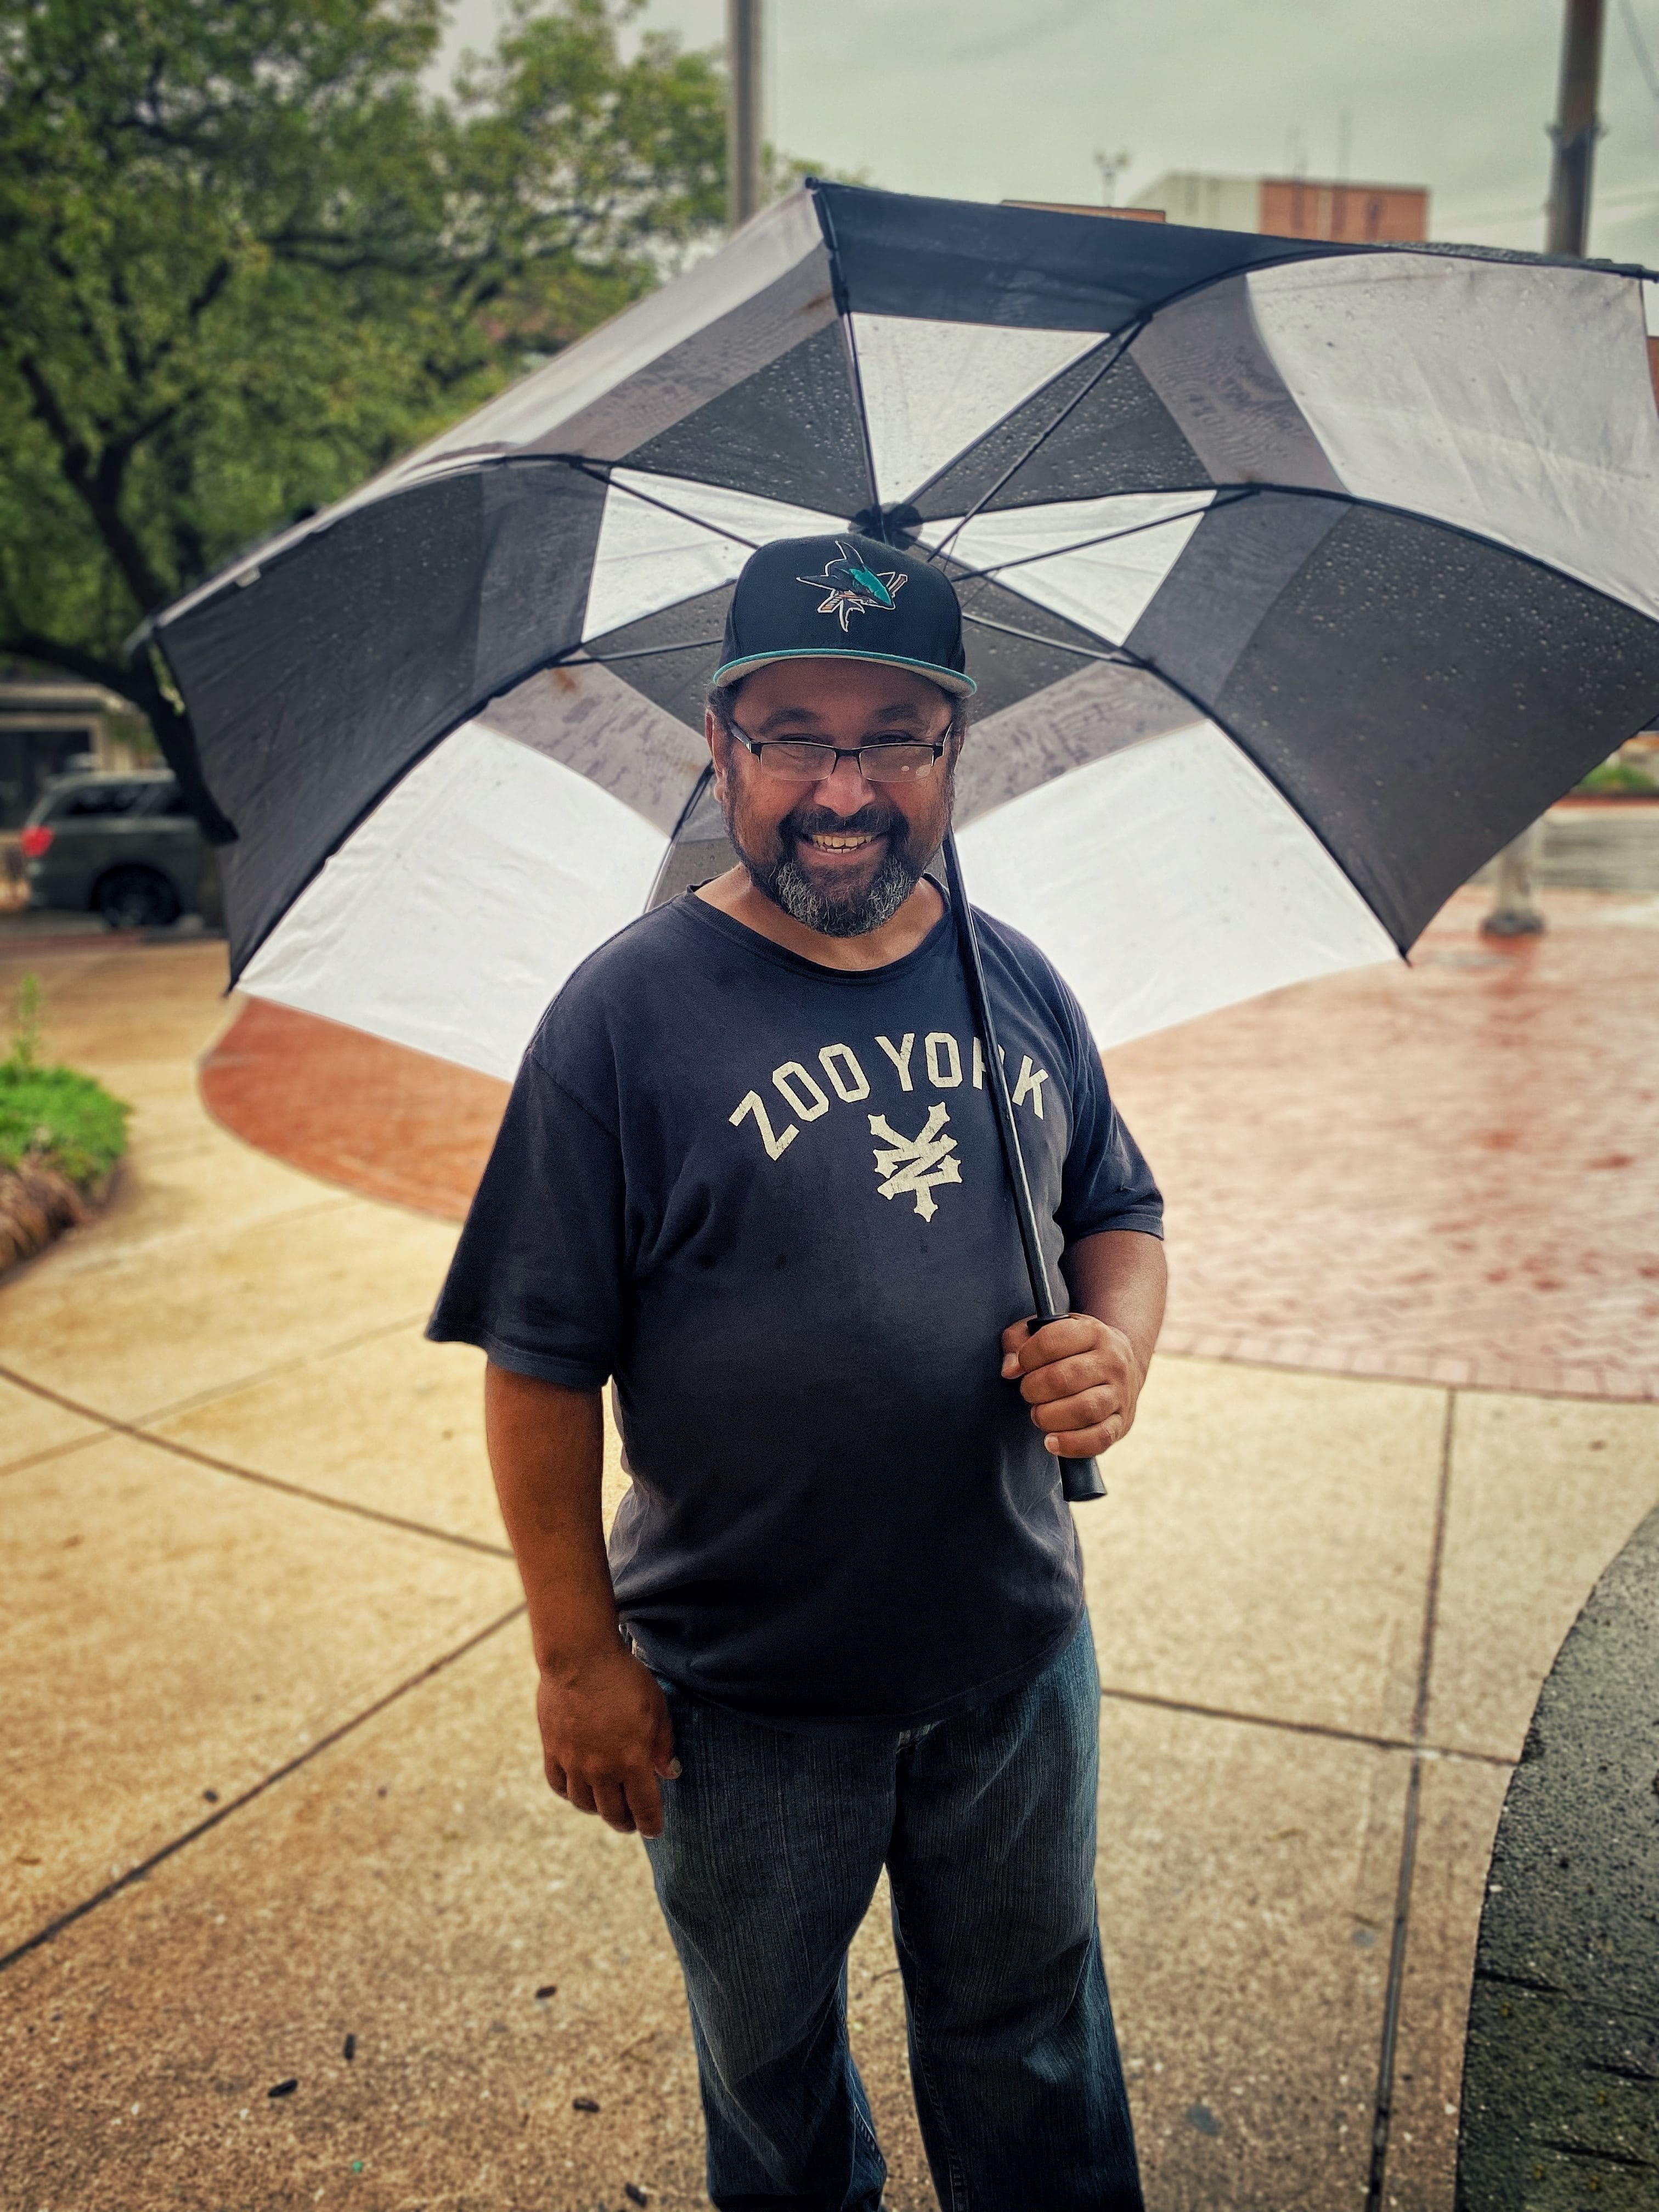 Man in a Zoo York T-shirt smiling and holding a big black and white umbrella.